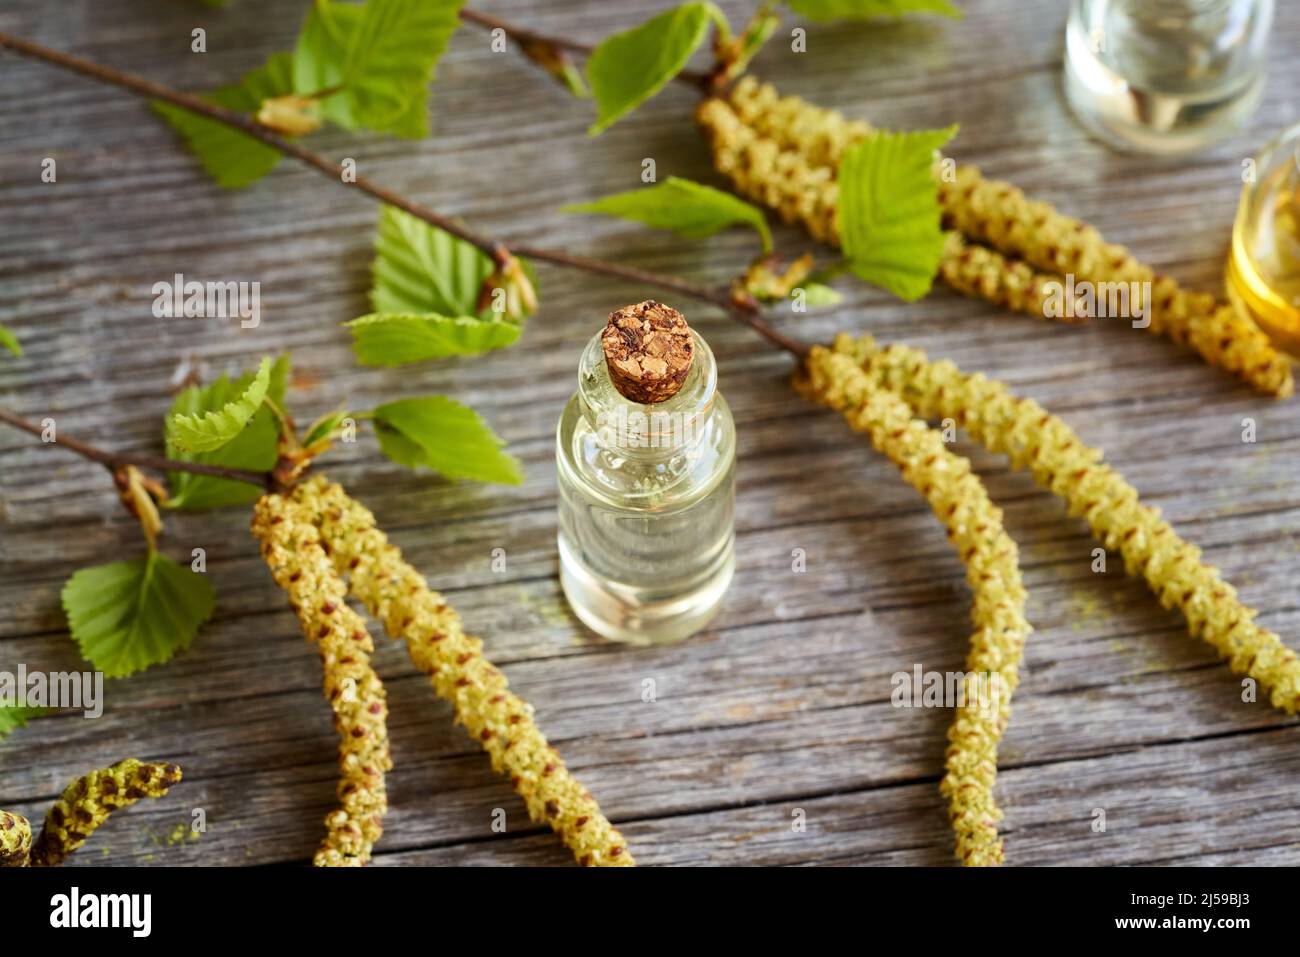 A bottle of essential oil with fresh birch branches Stock Photo